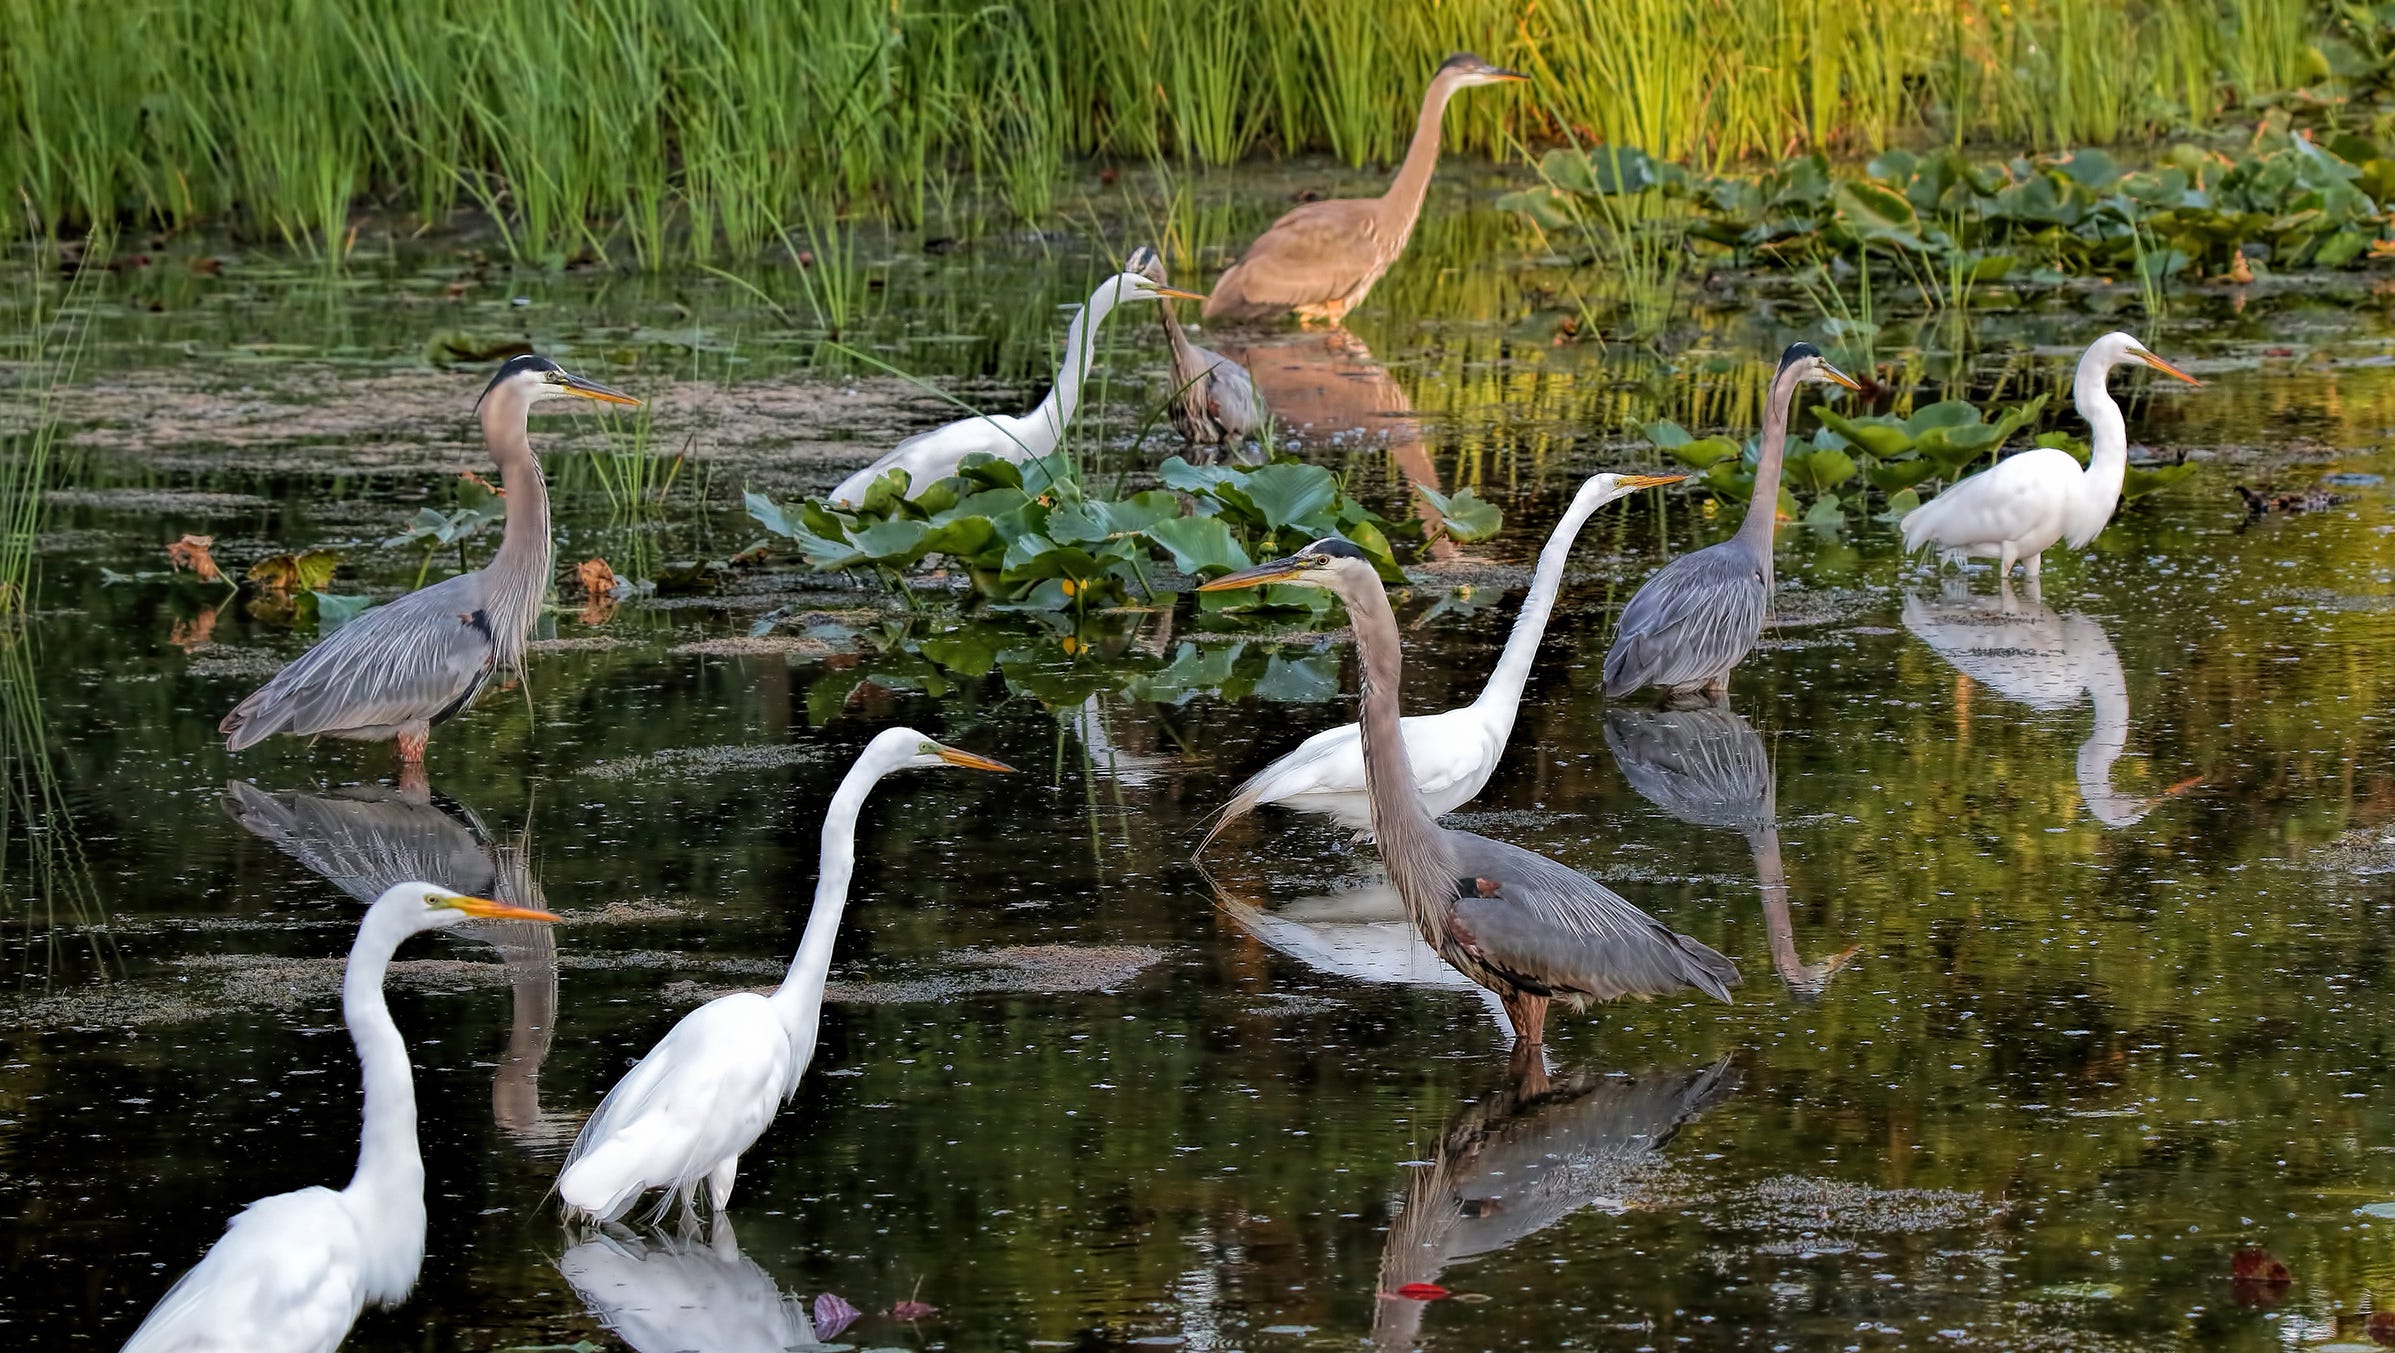 Young Great Blue Herons and Great Egrets practice fishing at Kensington Metro Park in "Fledglings," by Mudg Poster of West Bloomfield. "They pulled many sticks, rocks and pond greens out of the water," she said. "Every once in awhile a surprised bird caught a fish."